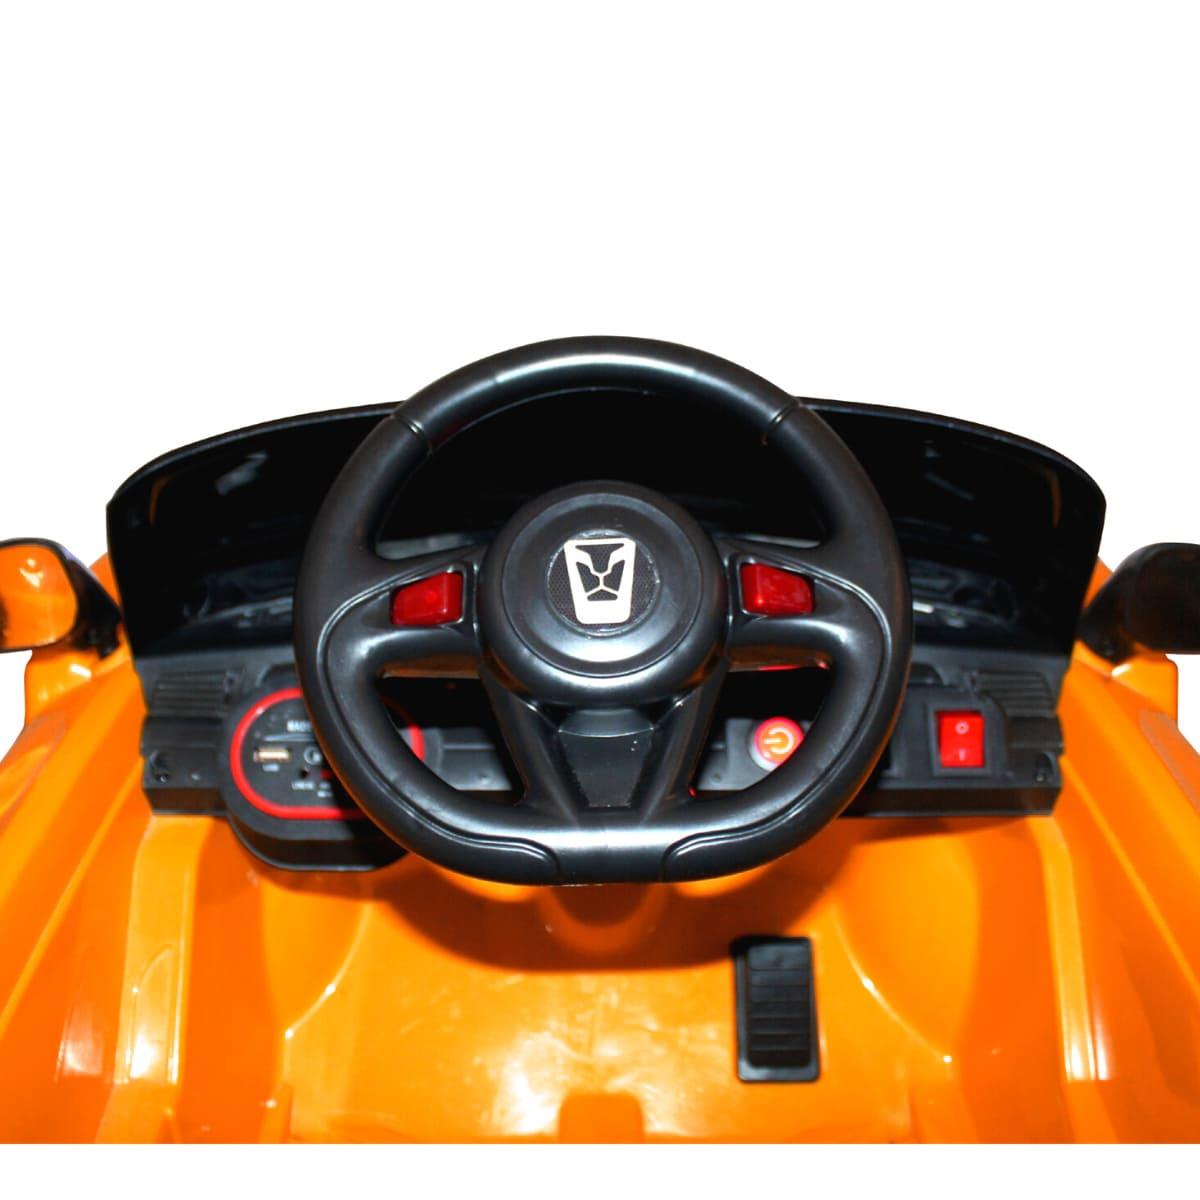 PATOYS | Rambo-Lamboo Best Electric Car for Kids, Remote with Swing Function LFC-YKL-2688 | Orange Ride on Car PATOYS